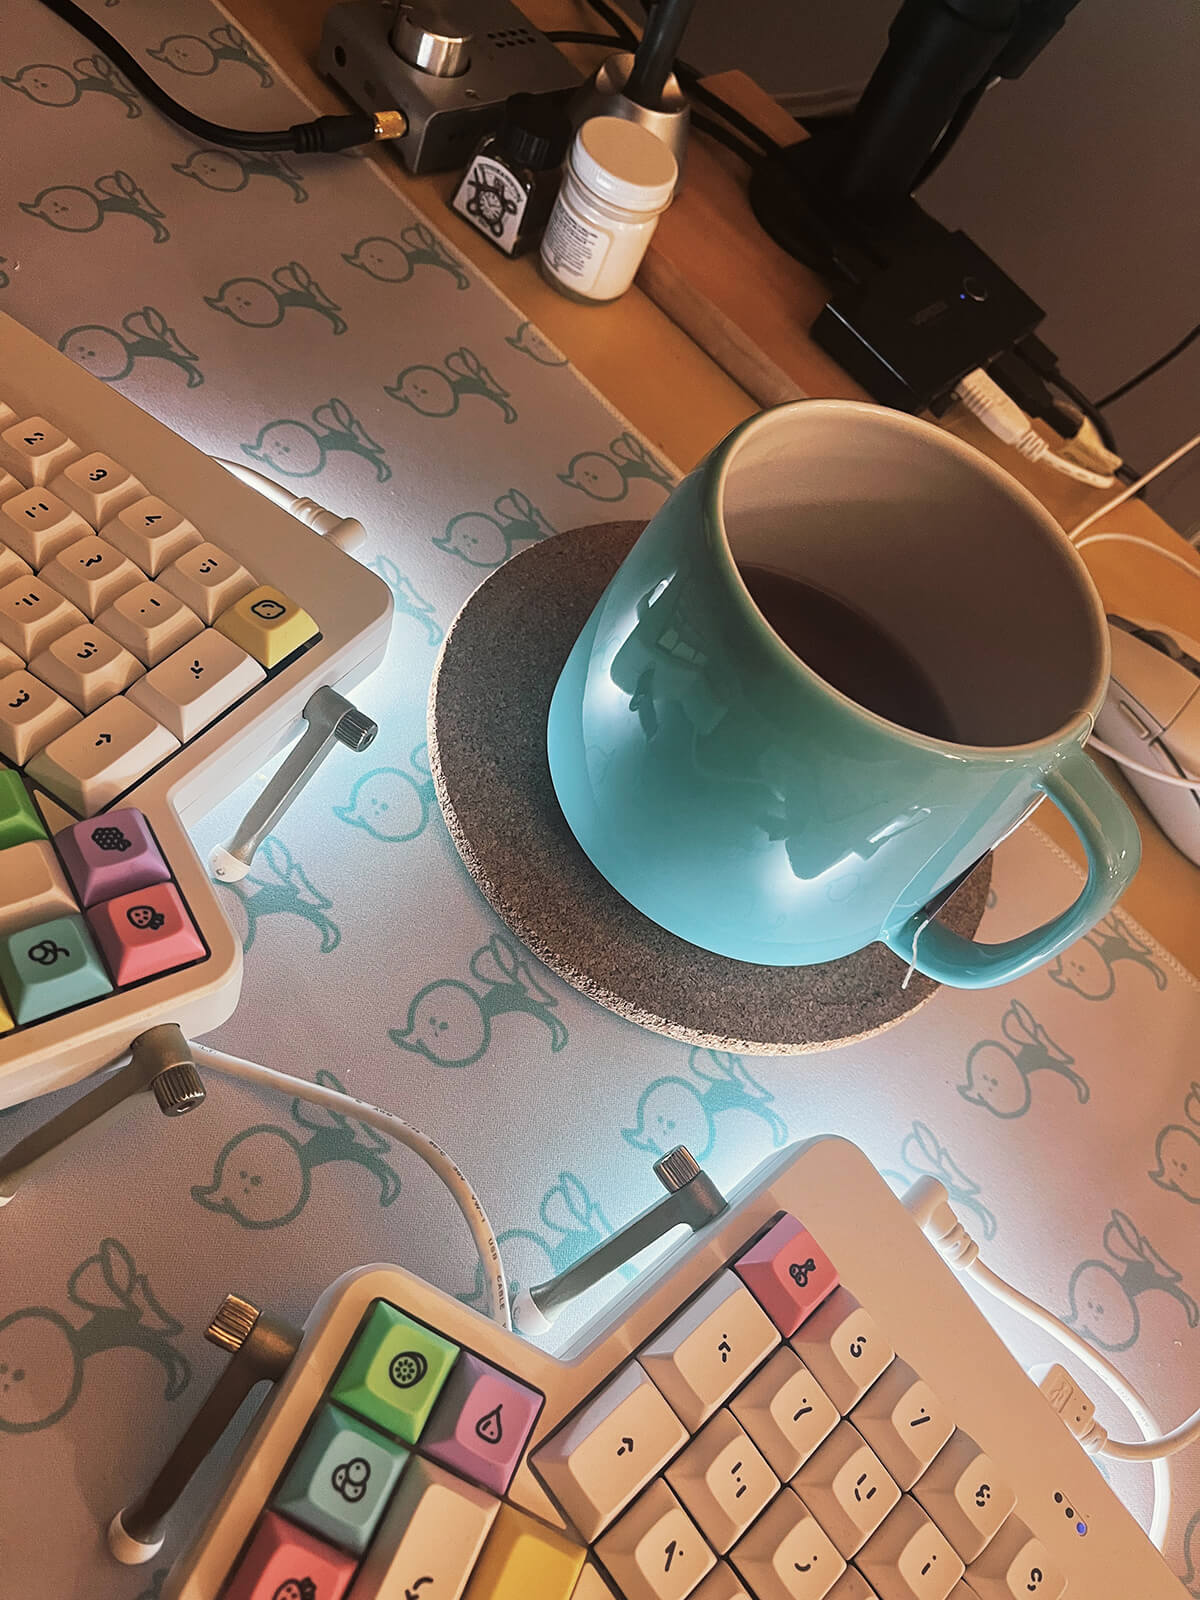 A big mug of tea in between my keyboard on my desk. Lots of messy cables in the background.